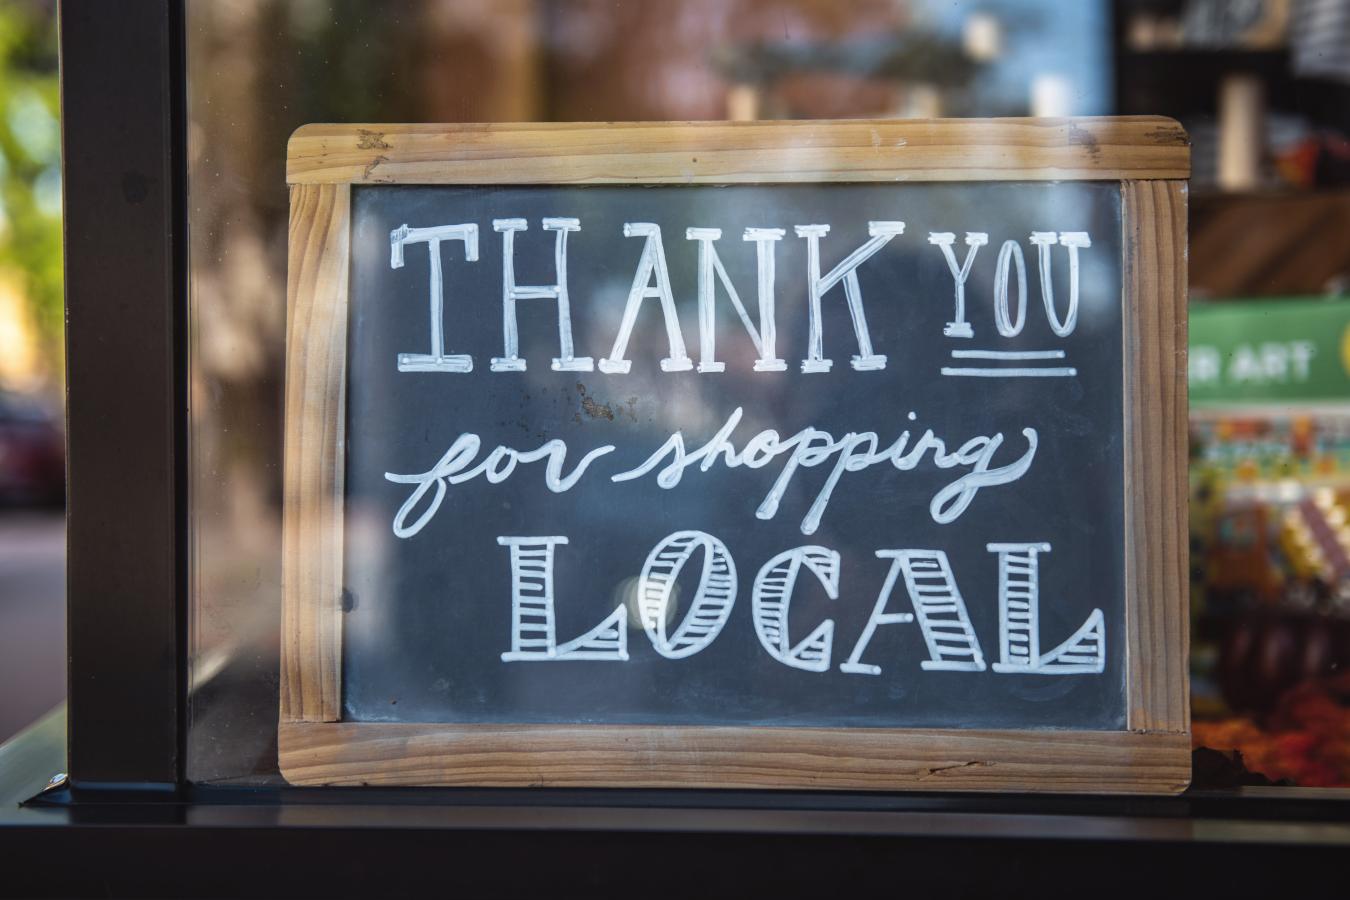 A "thank you for shopping local" chalkboard sign.